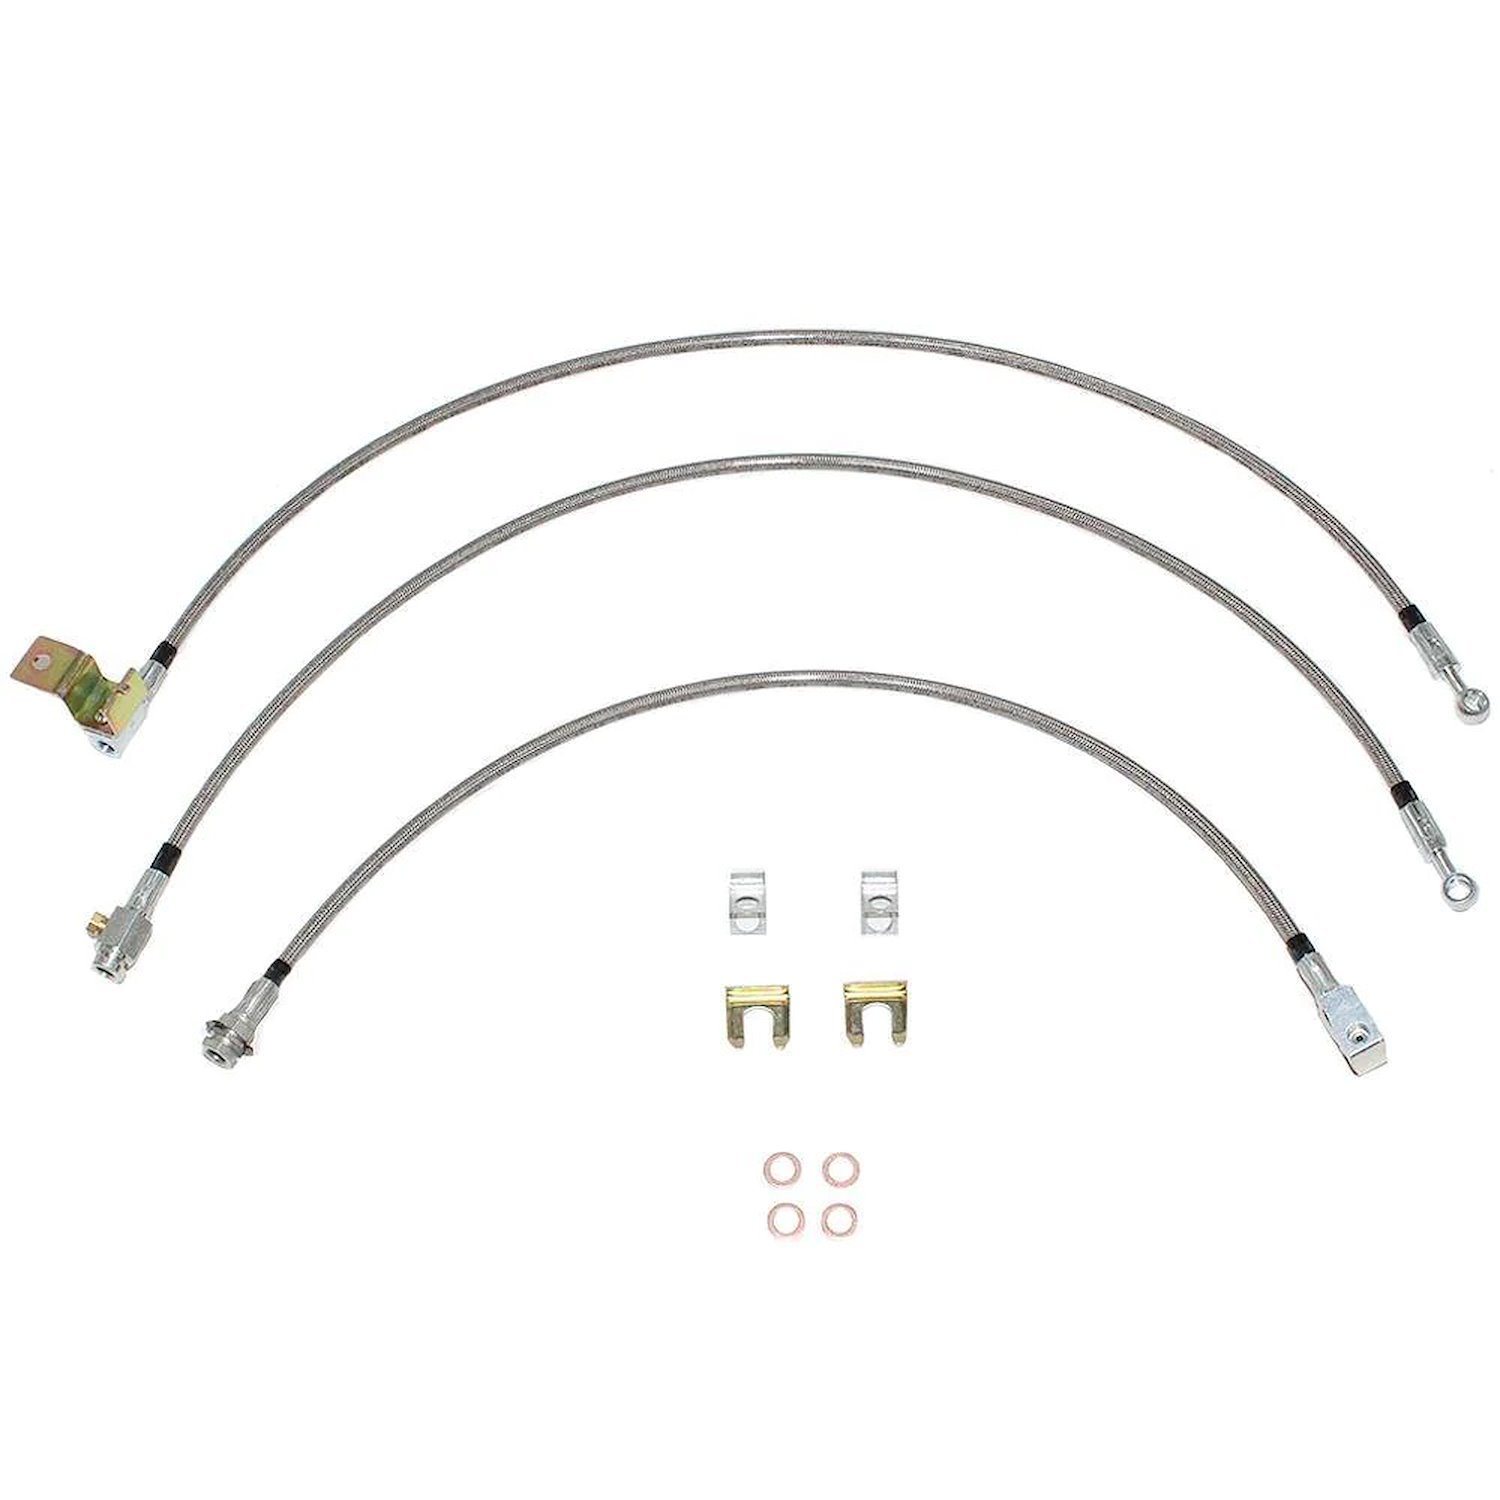 Complete Brake Hose Kit for 1997-2001 Dodge Ram 4wd w/Rear Drum [Braided Stainless]